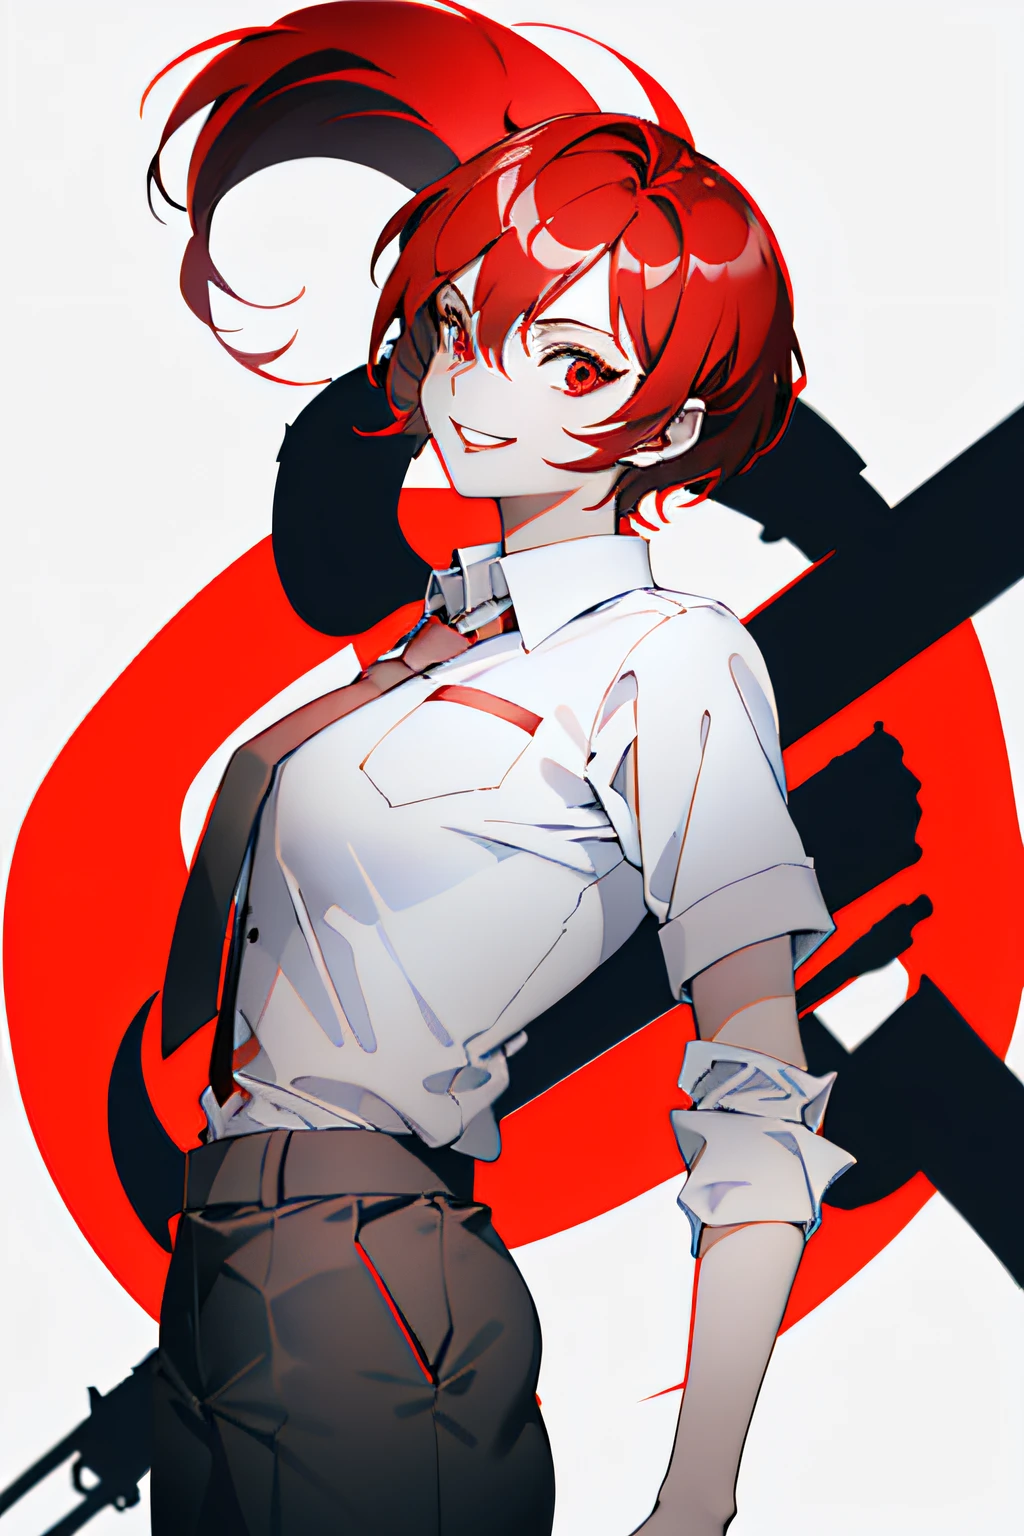 1girl with short red hair, red eyes, red lips and a tomboyish appearance, wearing a white shirt with a black blueish tie, paired with back bluish long pants. She has red devil horns and a crazy mad smile on her face, wielding an axe as her weapon.